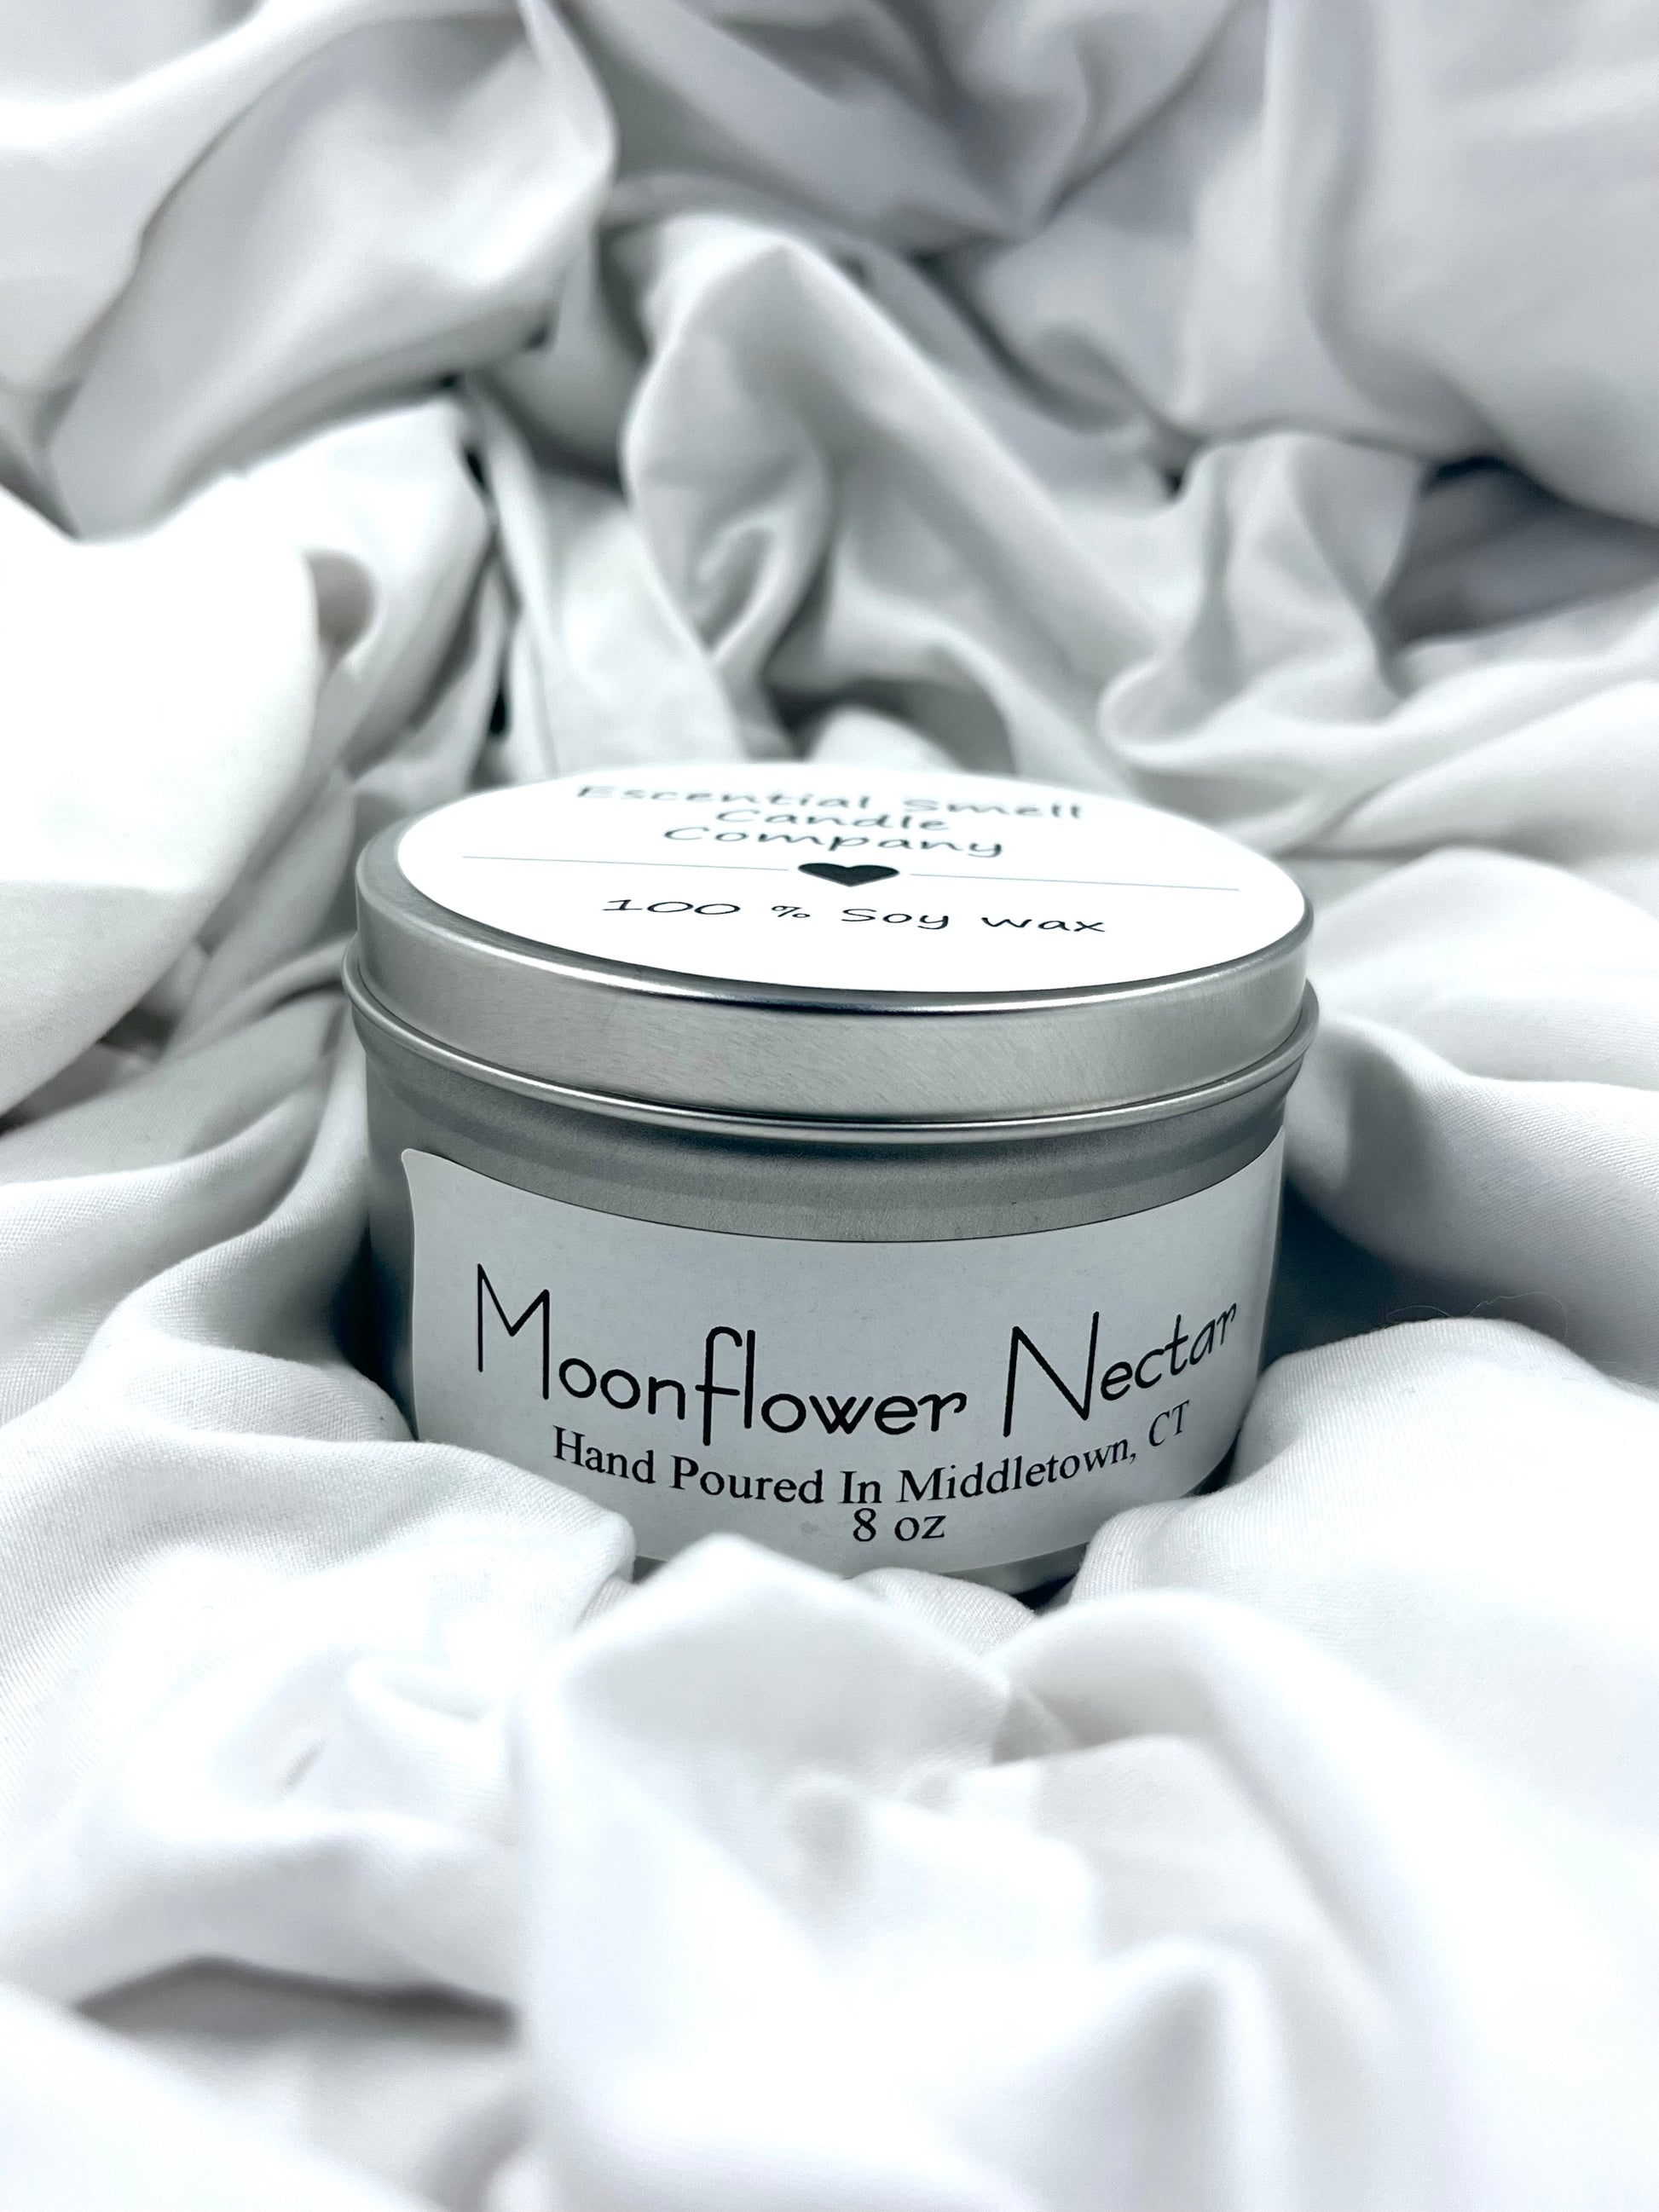 This sweet fragrance of Moonflower Nectar has notes of juicy pear and agave mixed is with beautiful floral notes and a hint of amber and musk. It's the perfect gift for her and is sure to light up any room she's in. These decorative candles can also be used as wedding favors or baby shower favors.